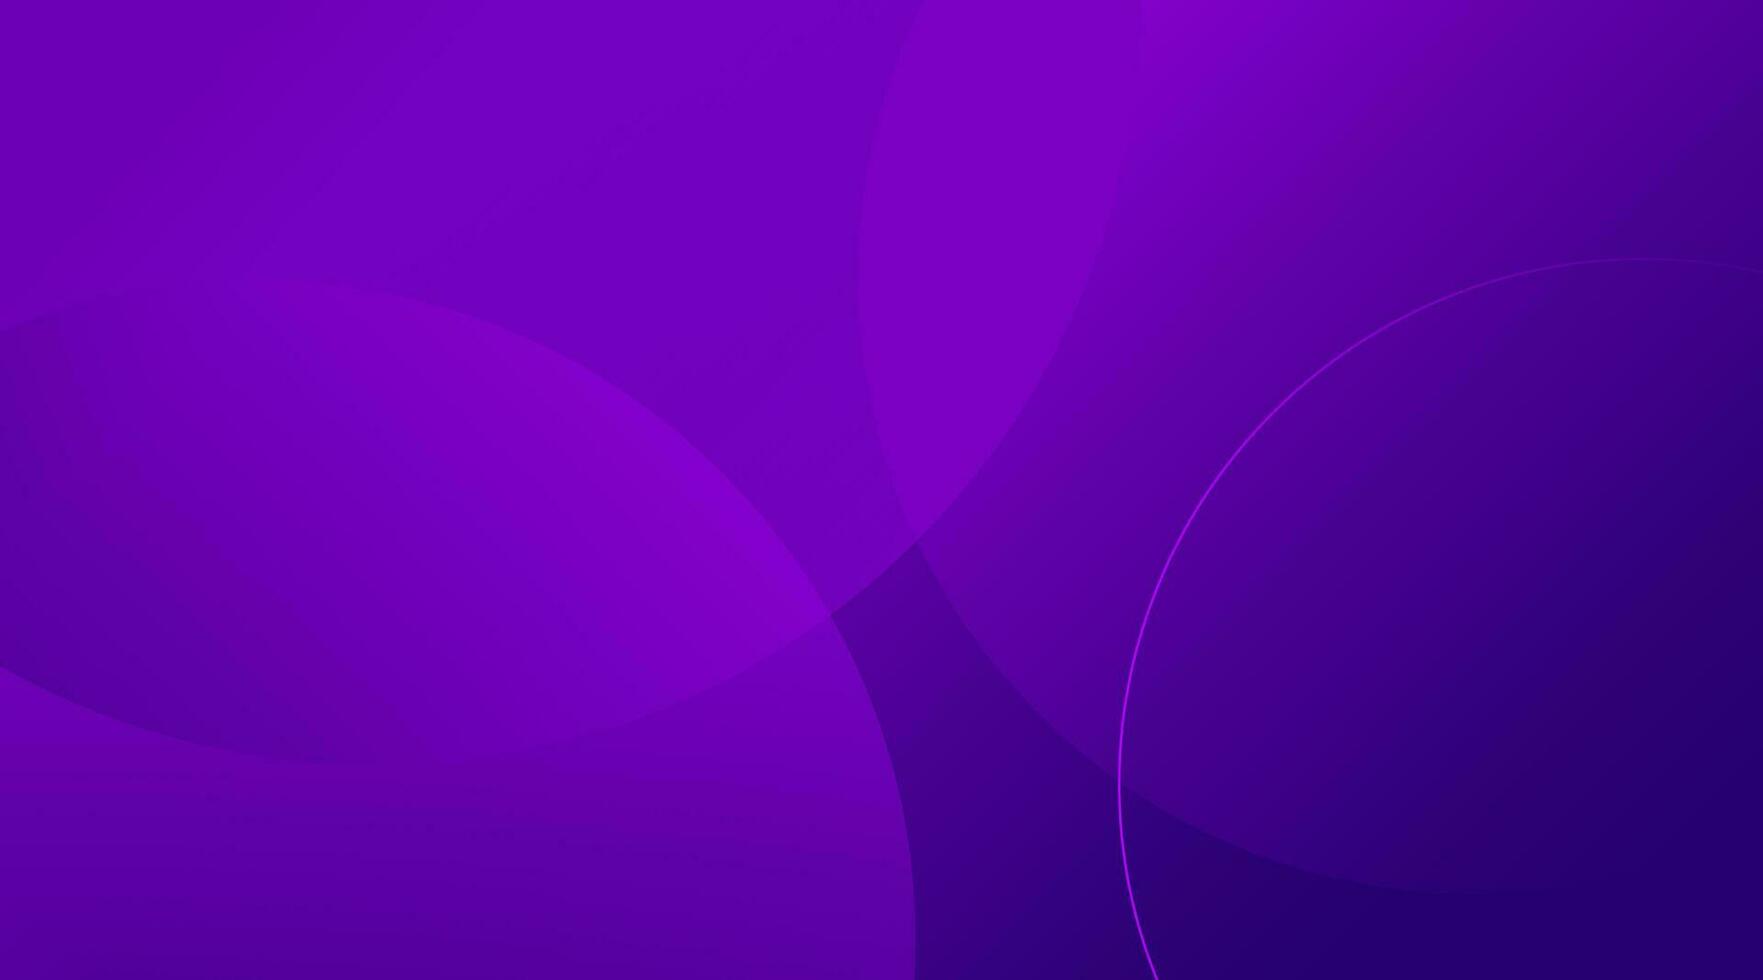 Minimal geometric abstract purple background. Dynamic shapes composition. Vector illustration